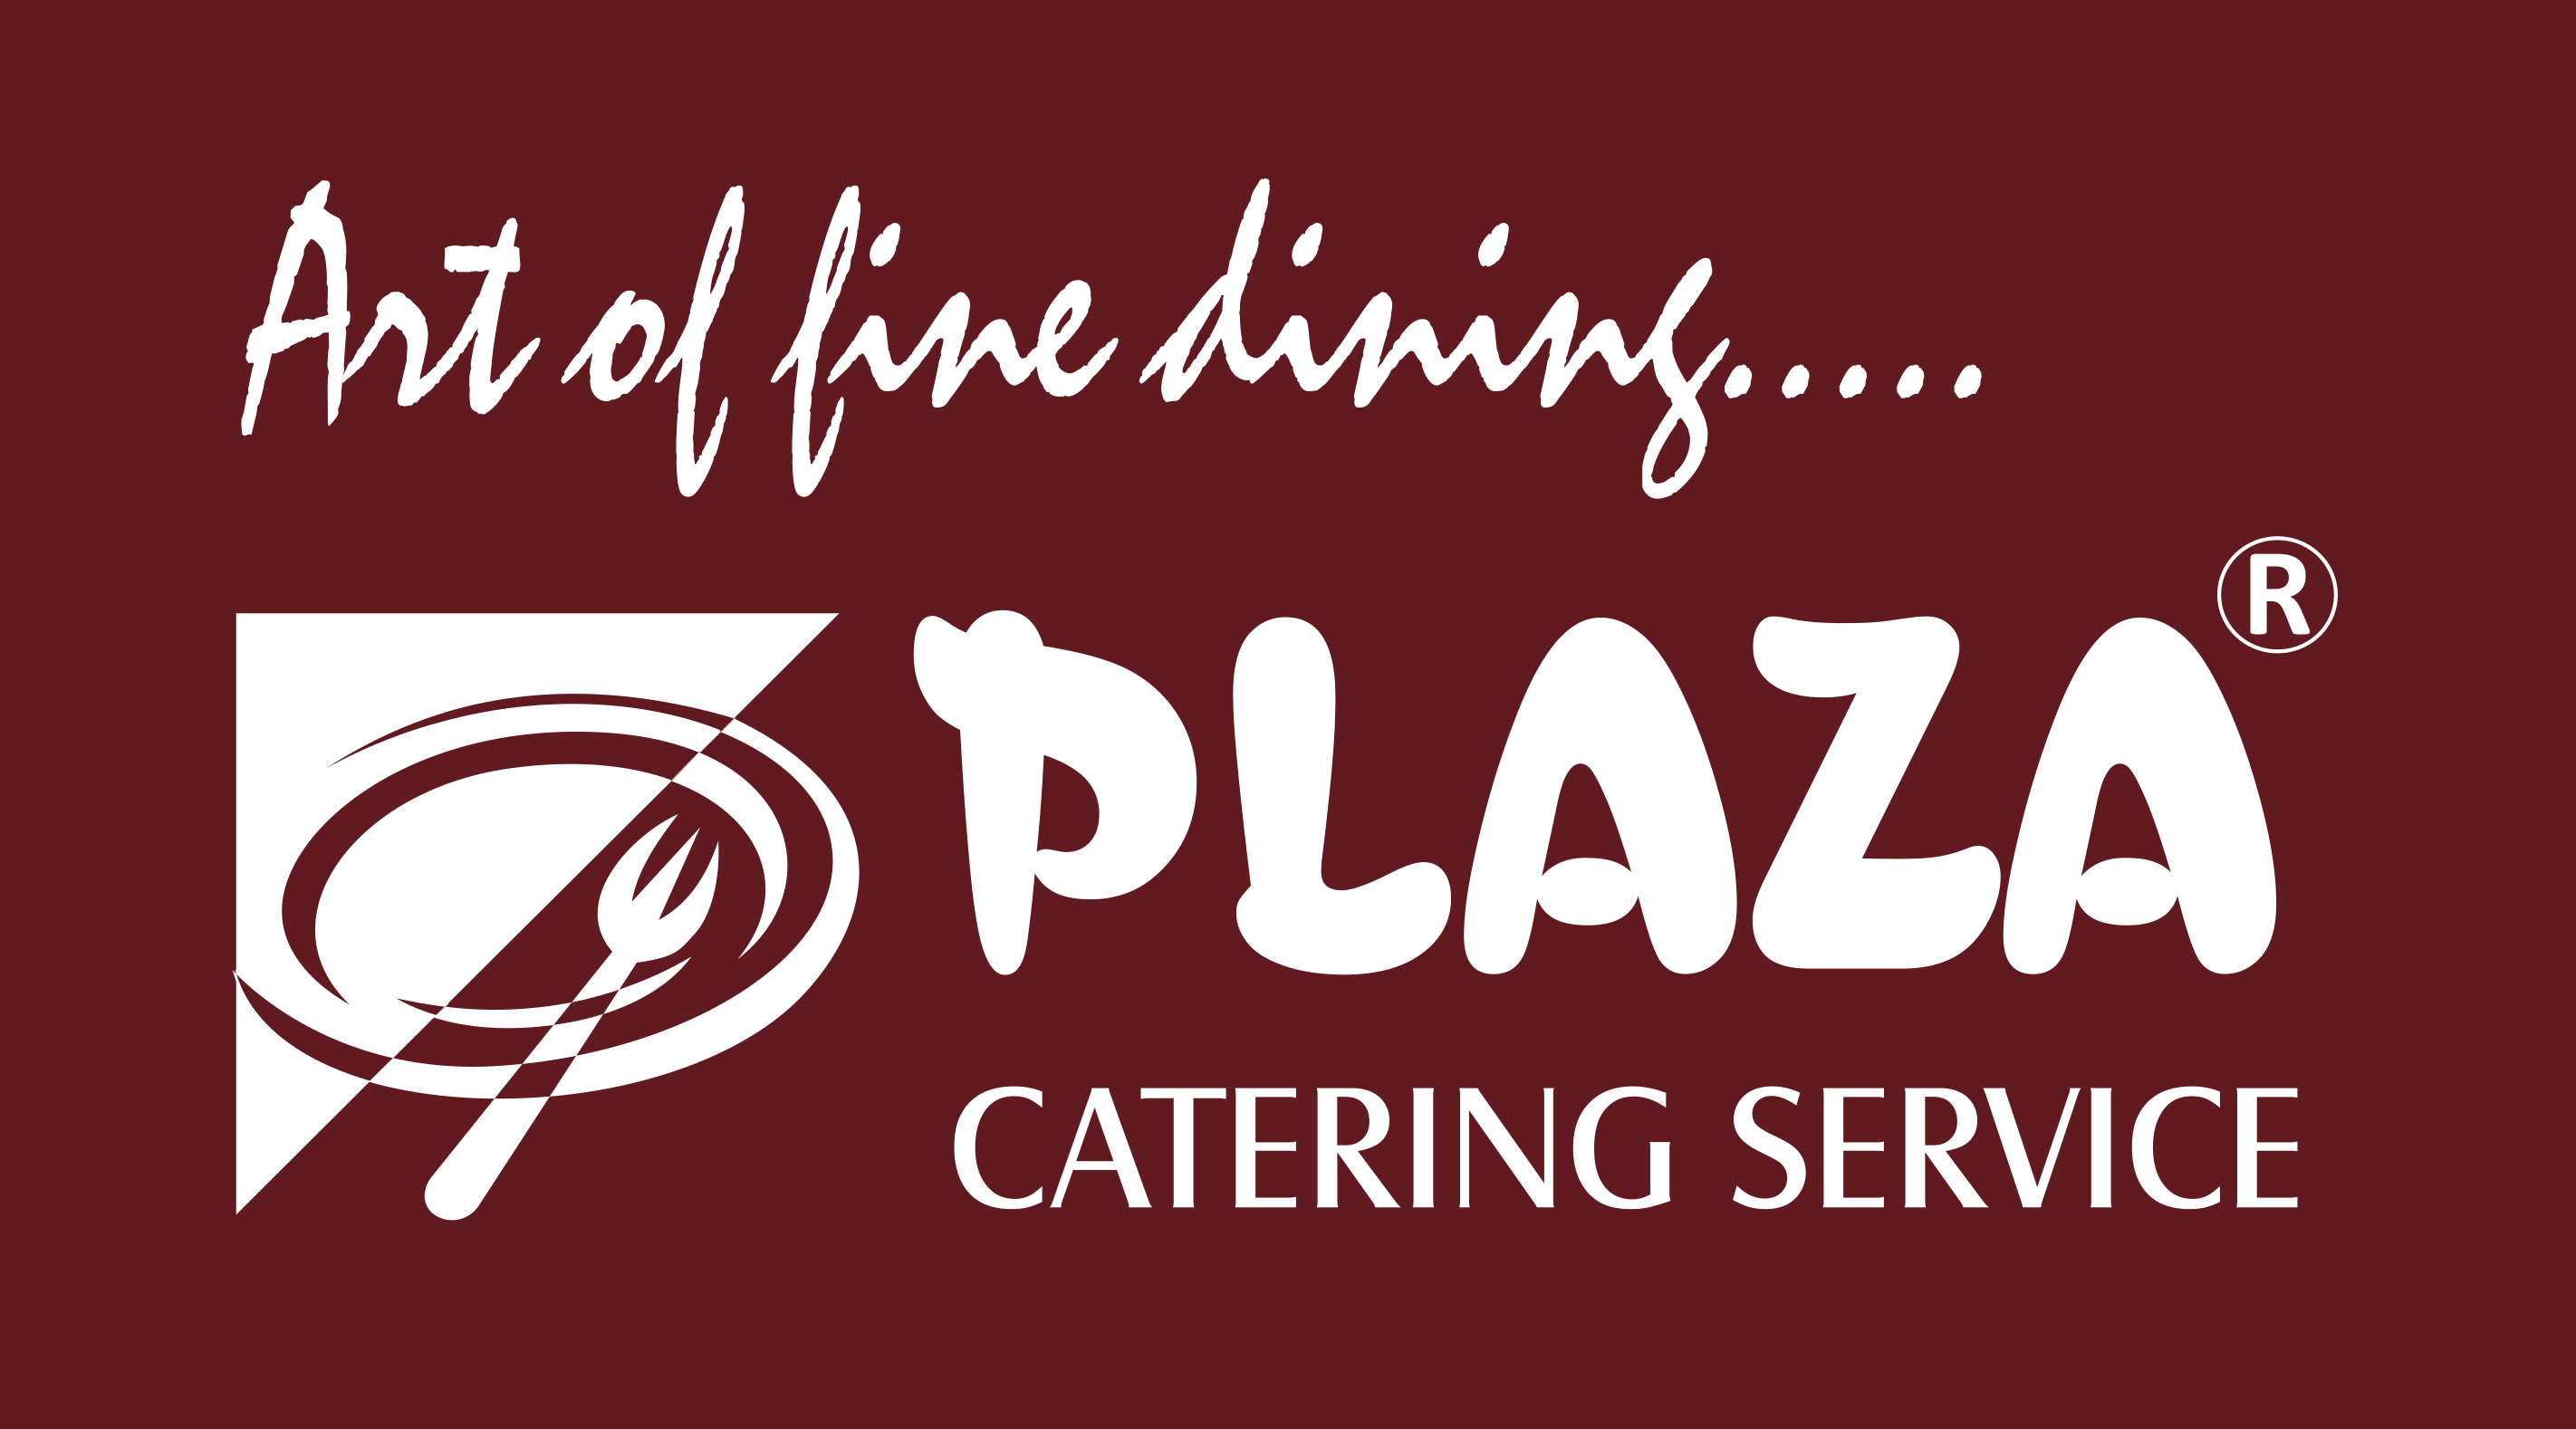 Plaza Catering Service